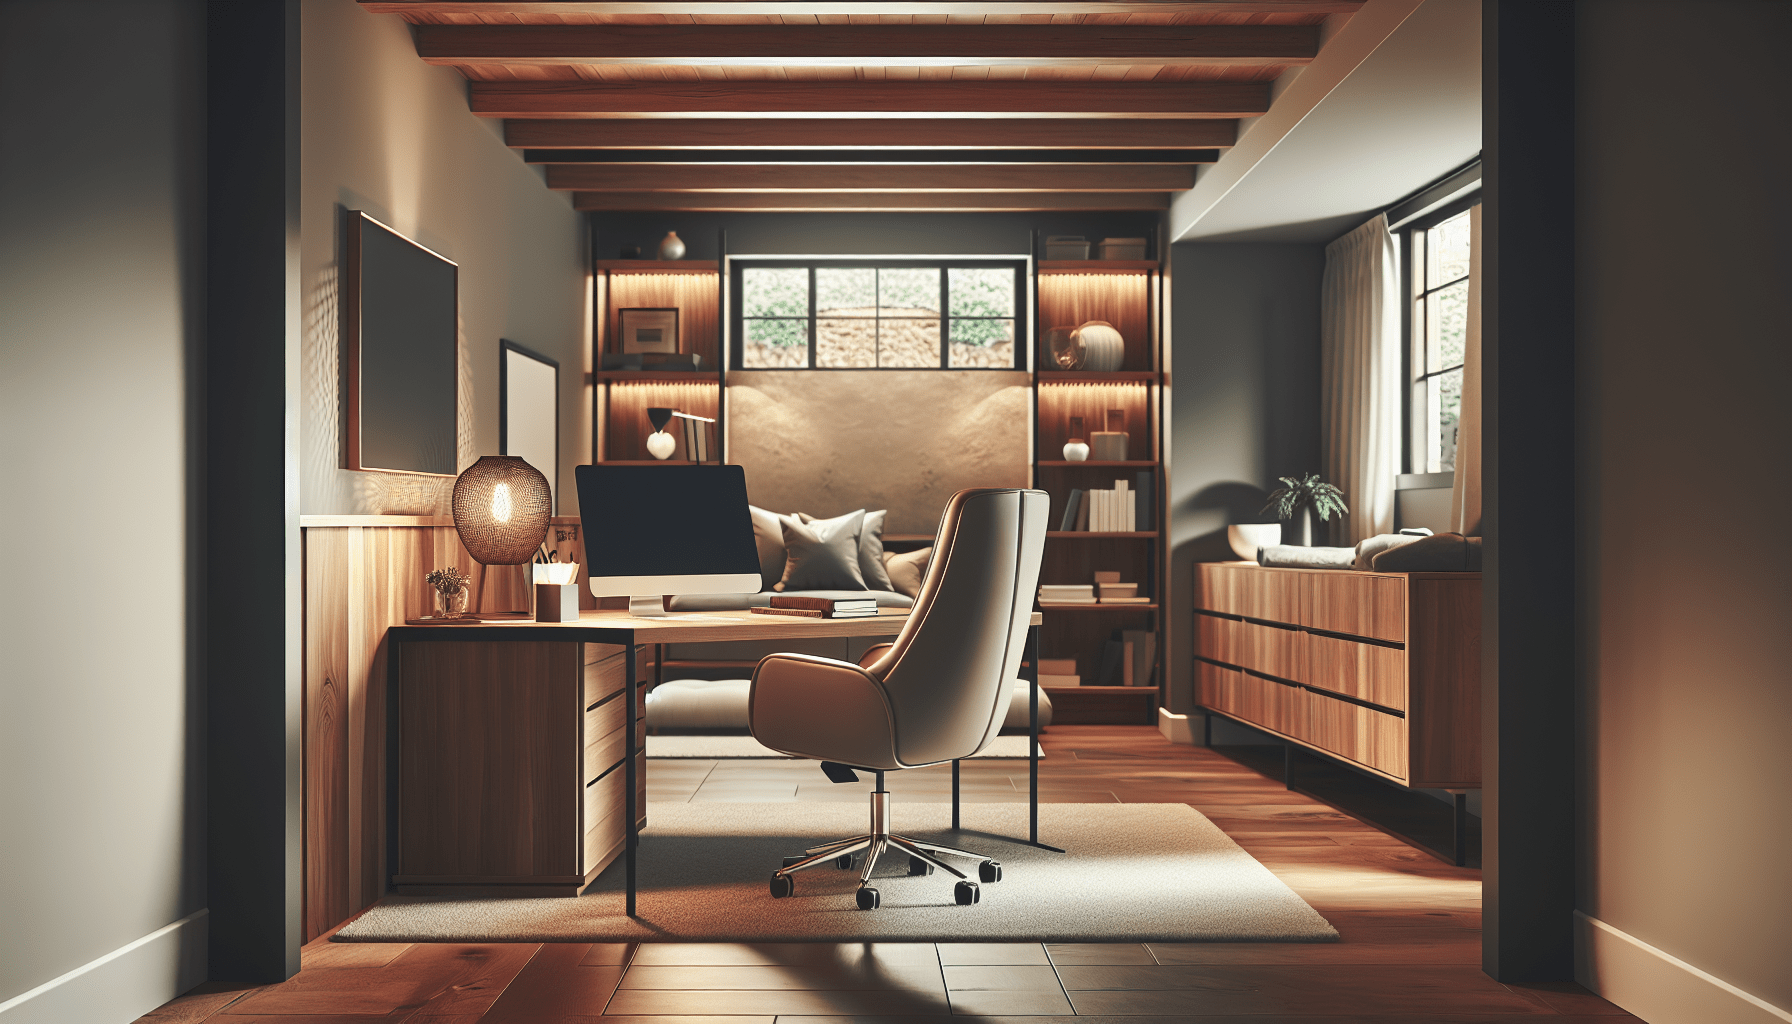 Transform Your Basement into a Stylish Home Office